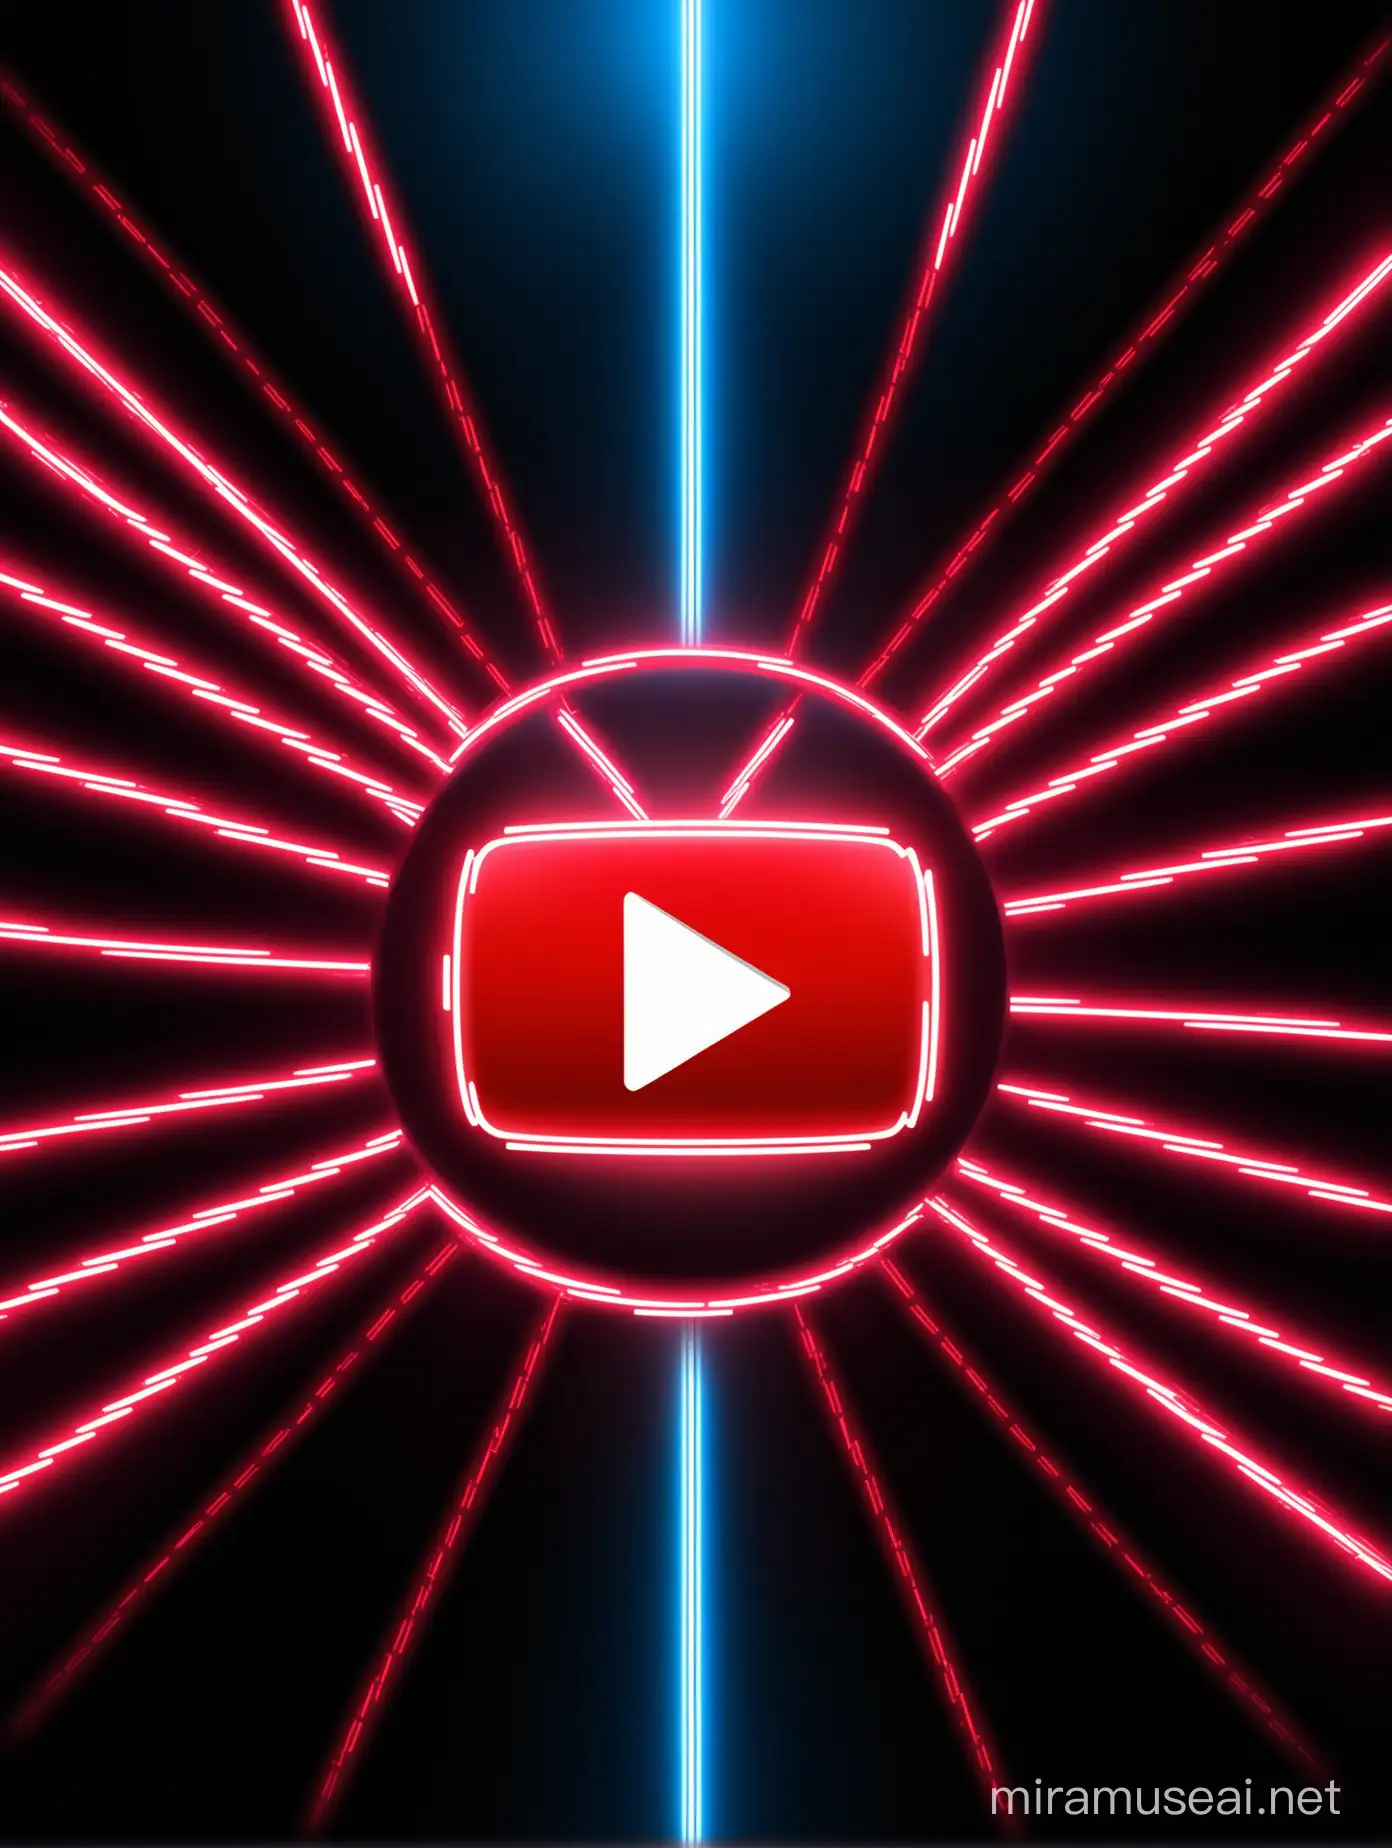 Futuristic Neon YouTube Logo with Red Thunderbolts on Dark Background